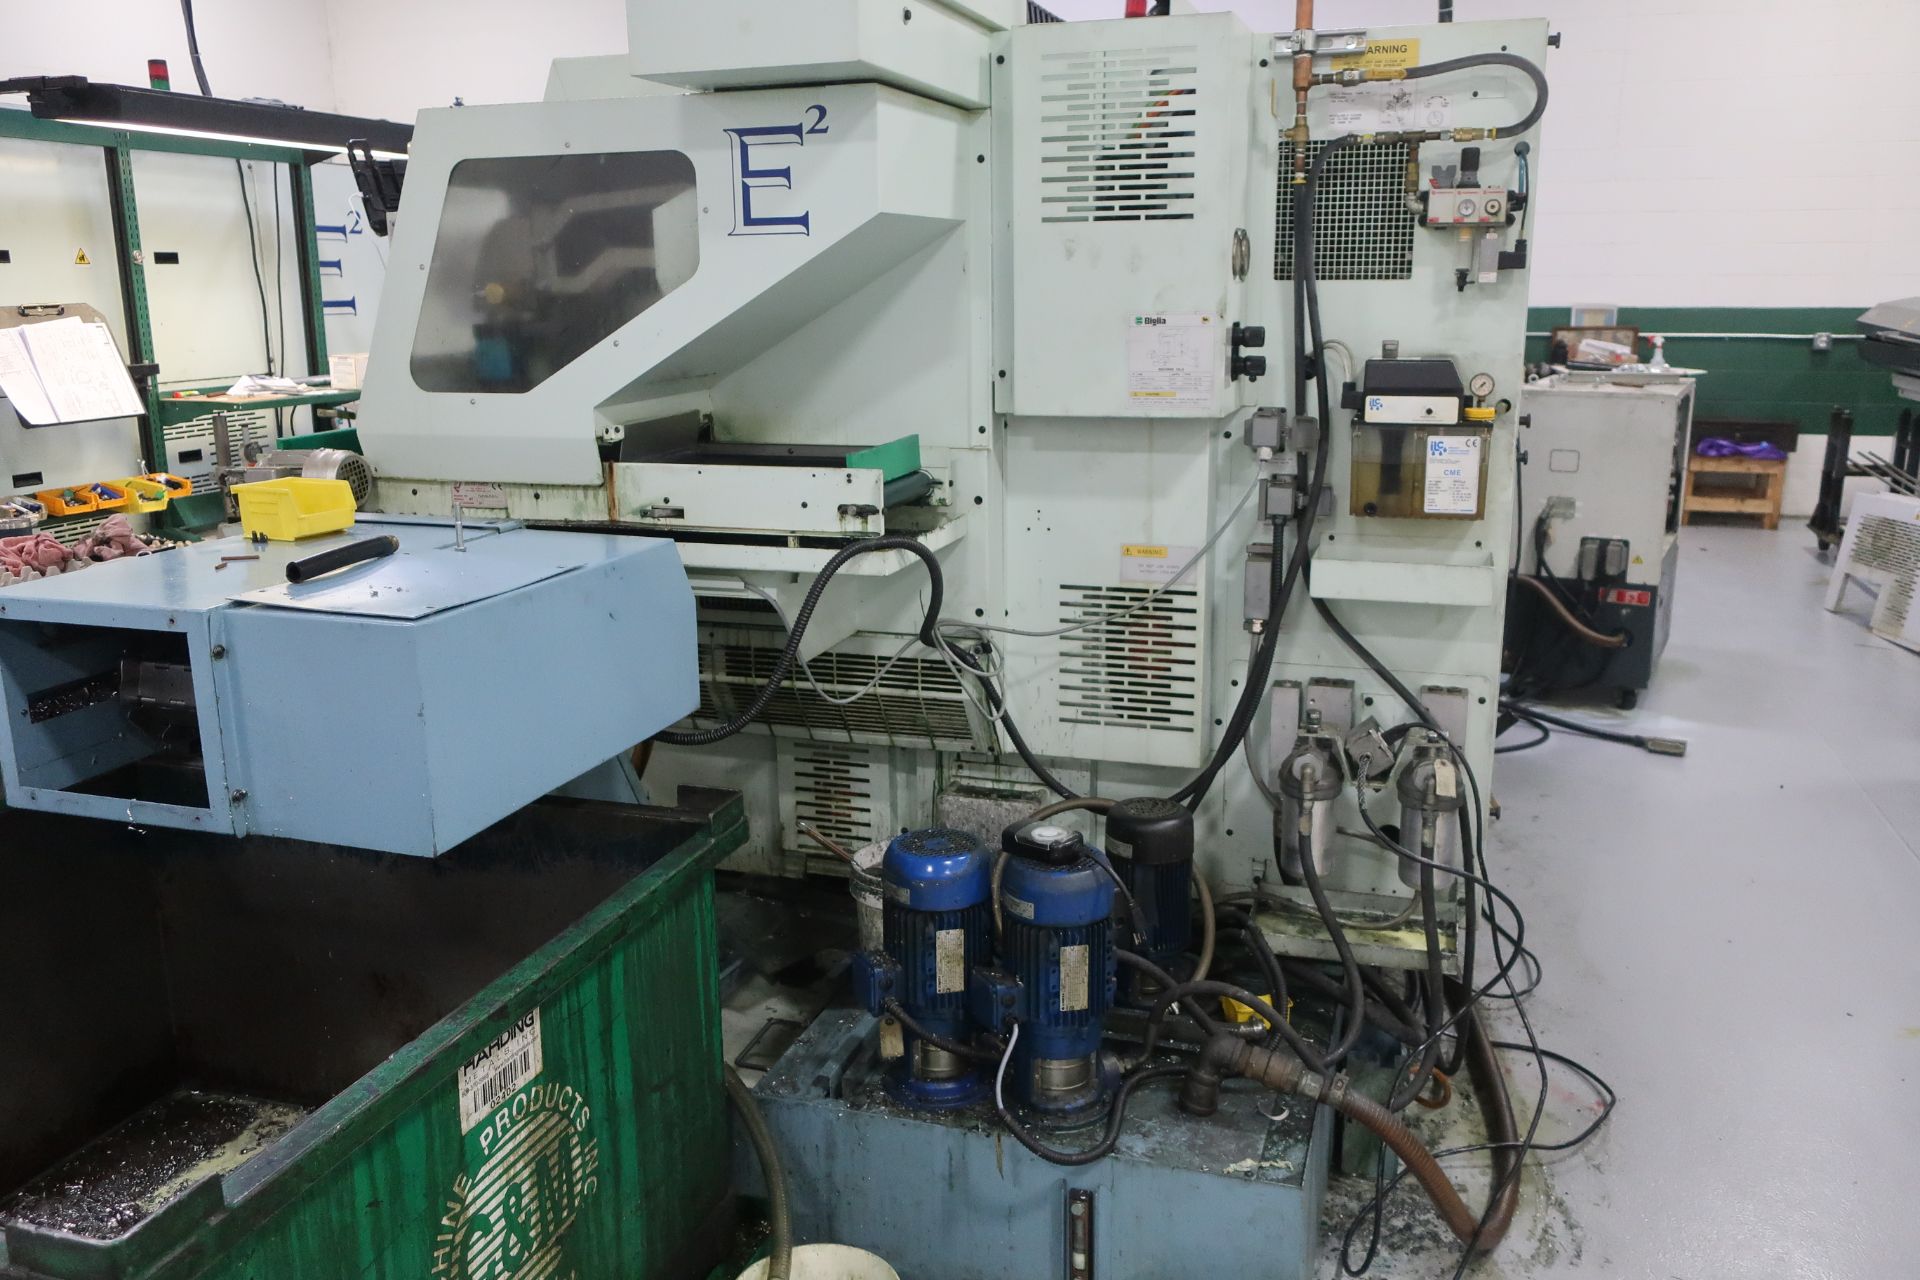 EUROTECH B465 Y2 QUATROFLEX TWIN SPINDLE TWIN TURRET CNC LATHE W/DUAL Y-AXIS, NEW 2011, SN 11129 - Image 10 of 19